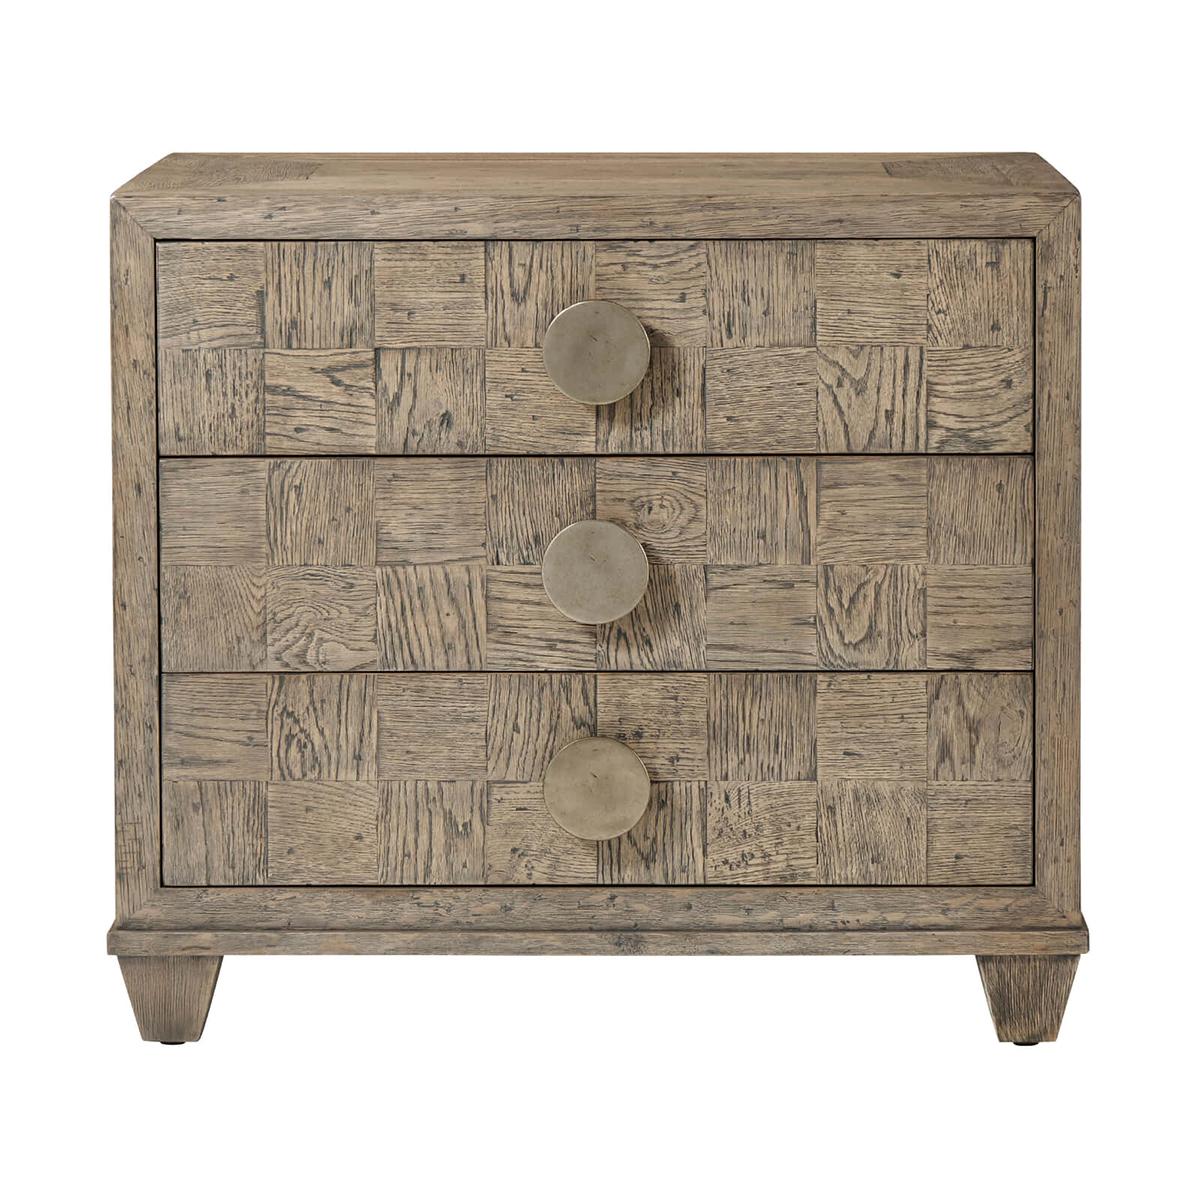 An Oak parquetry nightstand, handcrafted with rustic oak parquetry seen here in our Light Grey Echo Oak finish with picture frame parquetry top and sides. This nightstand includes three checkered parquetry soft-close drawers, vintage textured metal